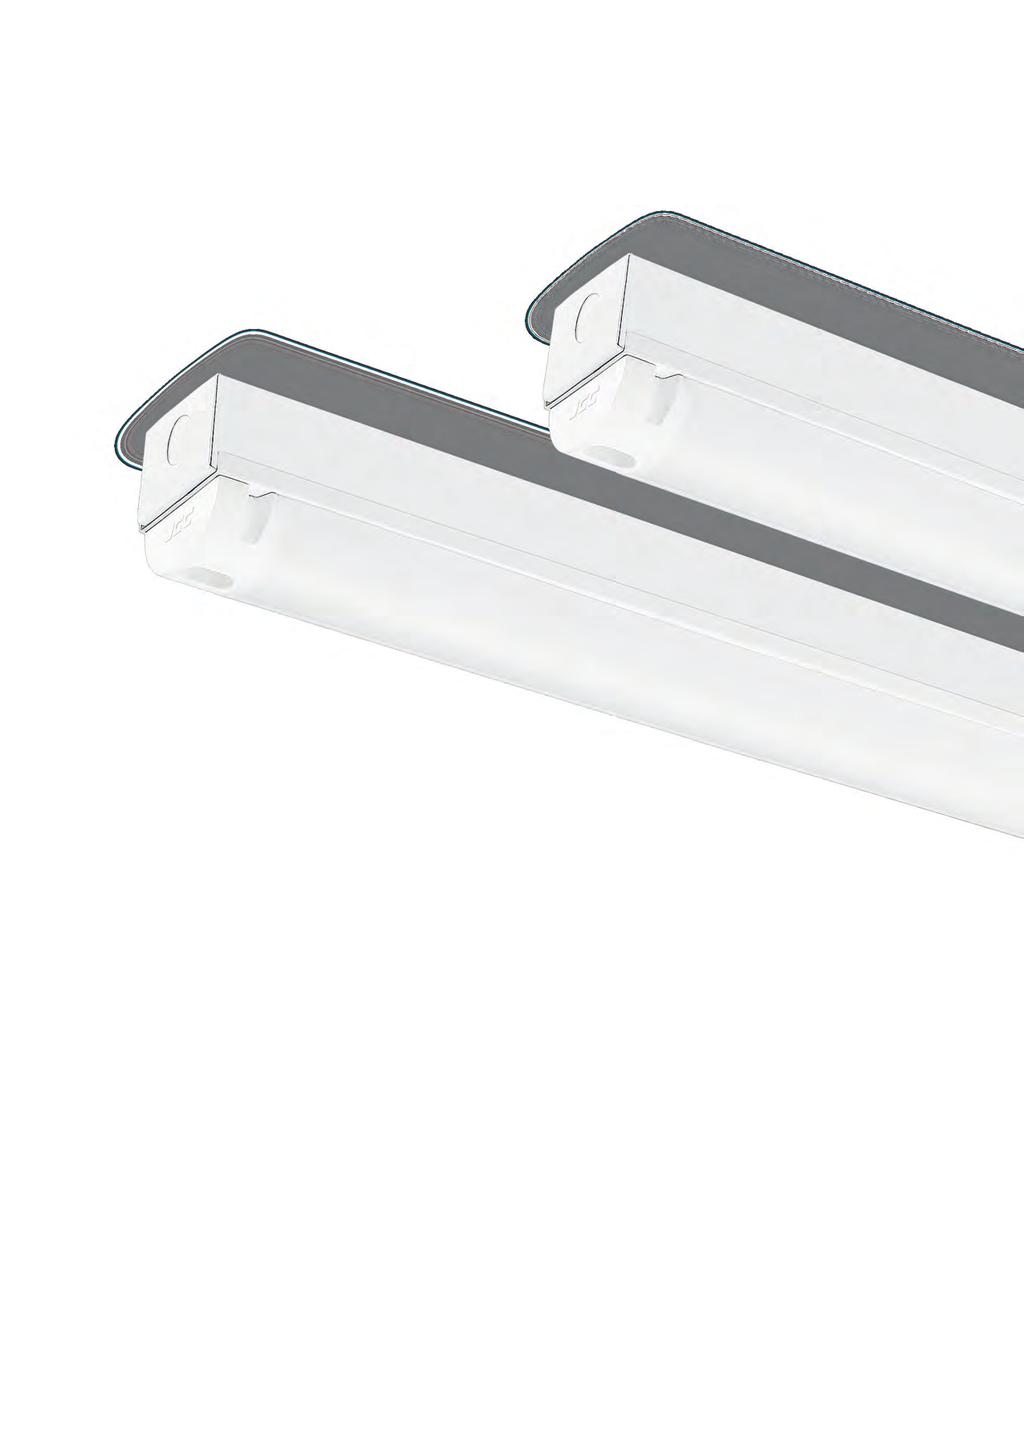 a company Ultra efficient, high performance LED battens Up to 50% energy savings against T8